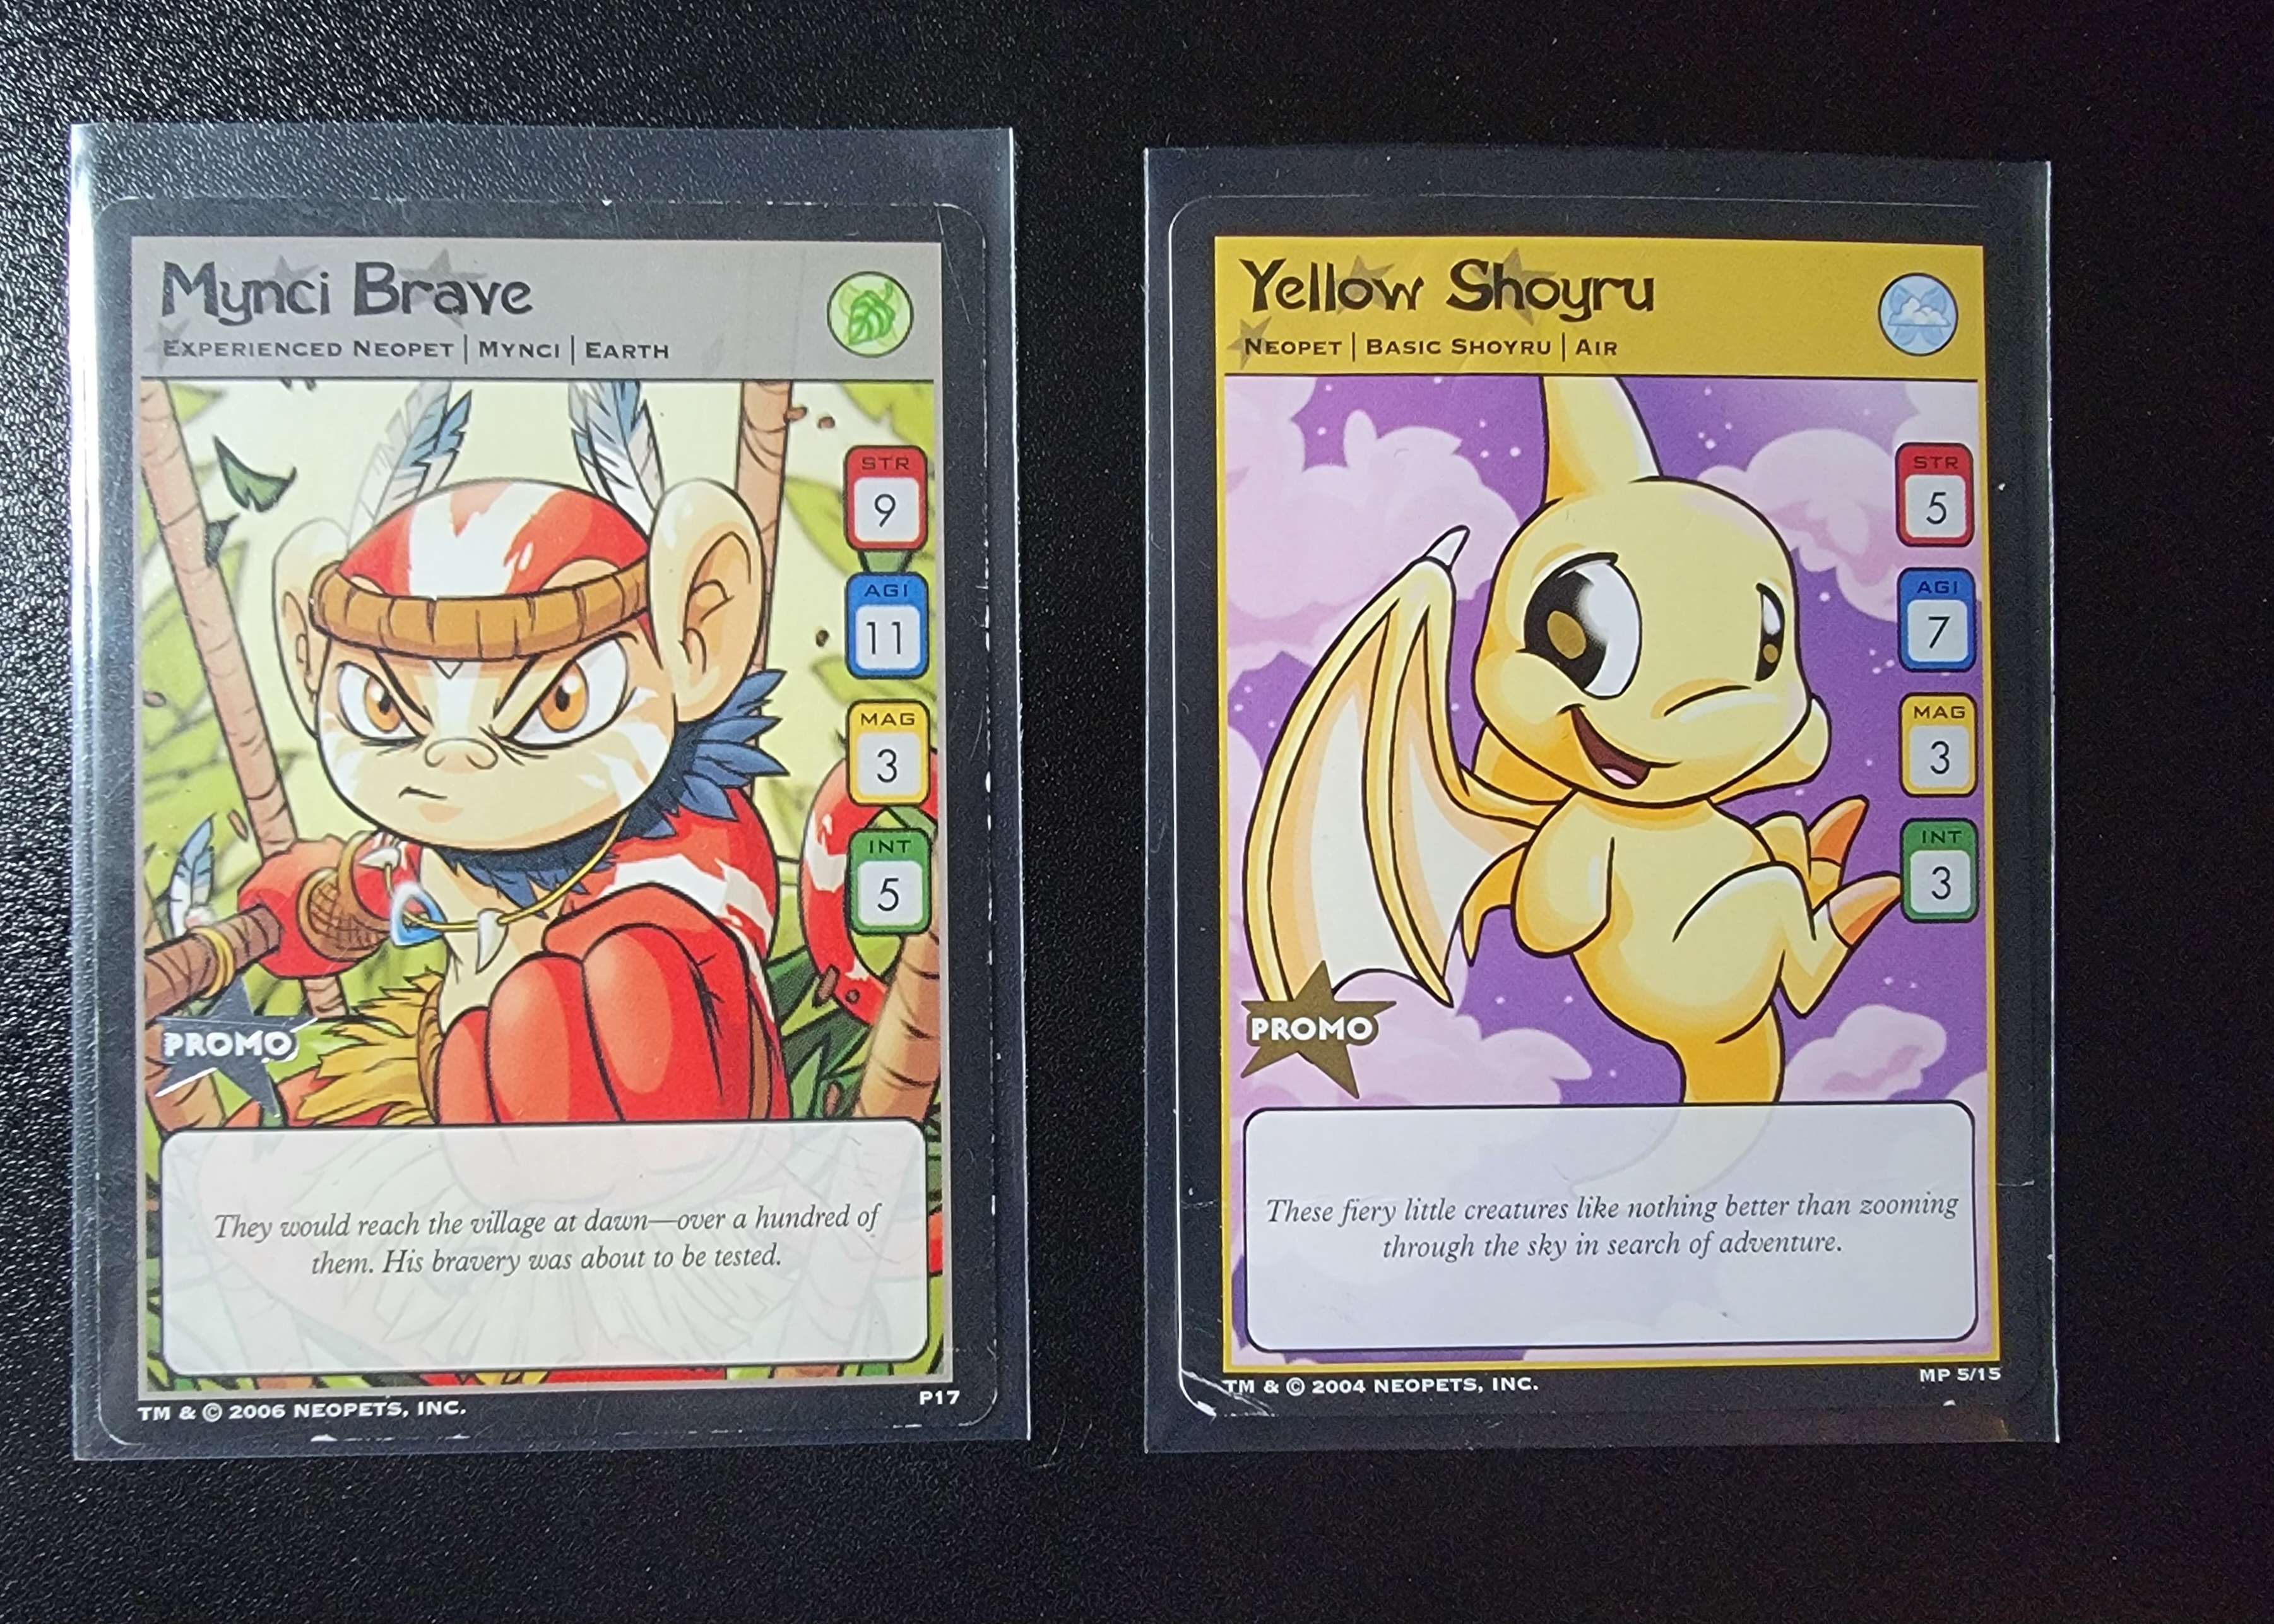 a mynci brave neopets trading card, and a yellow shoyru neopets trading card.